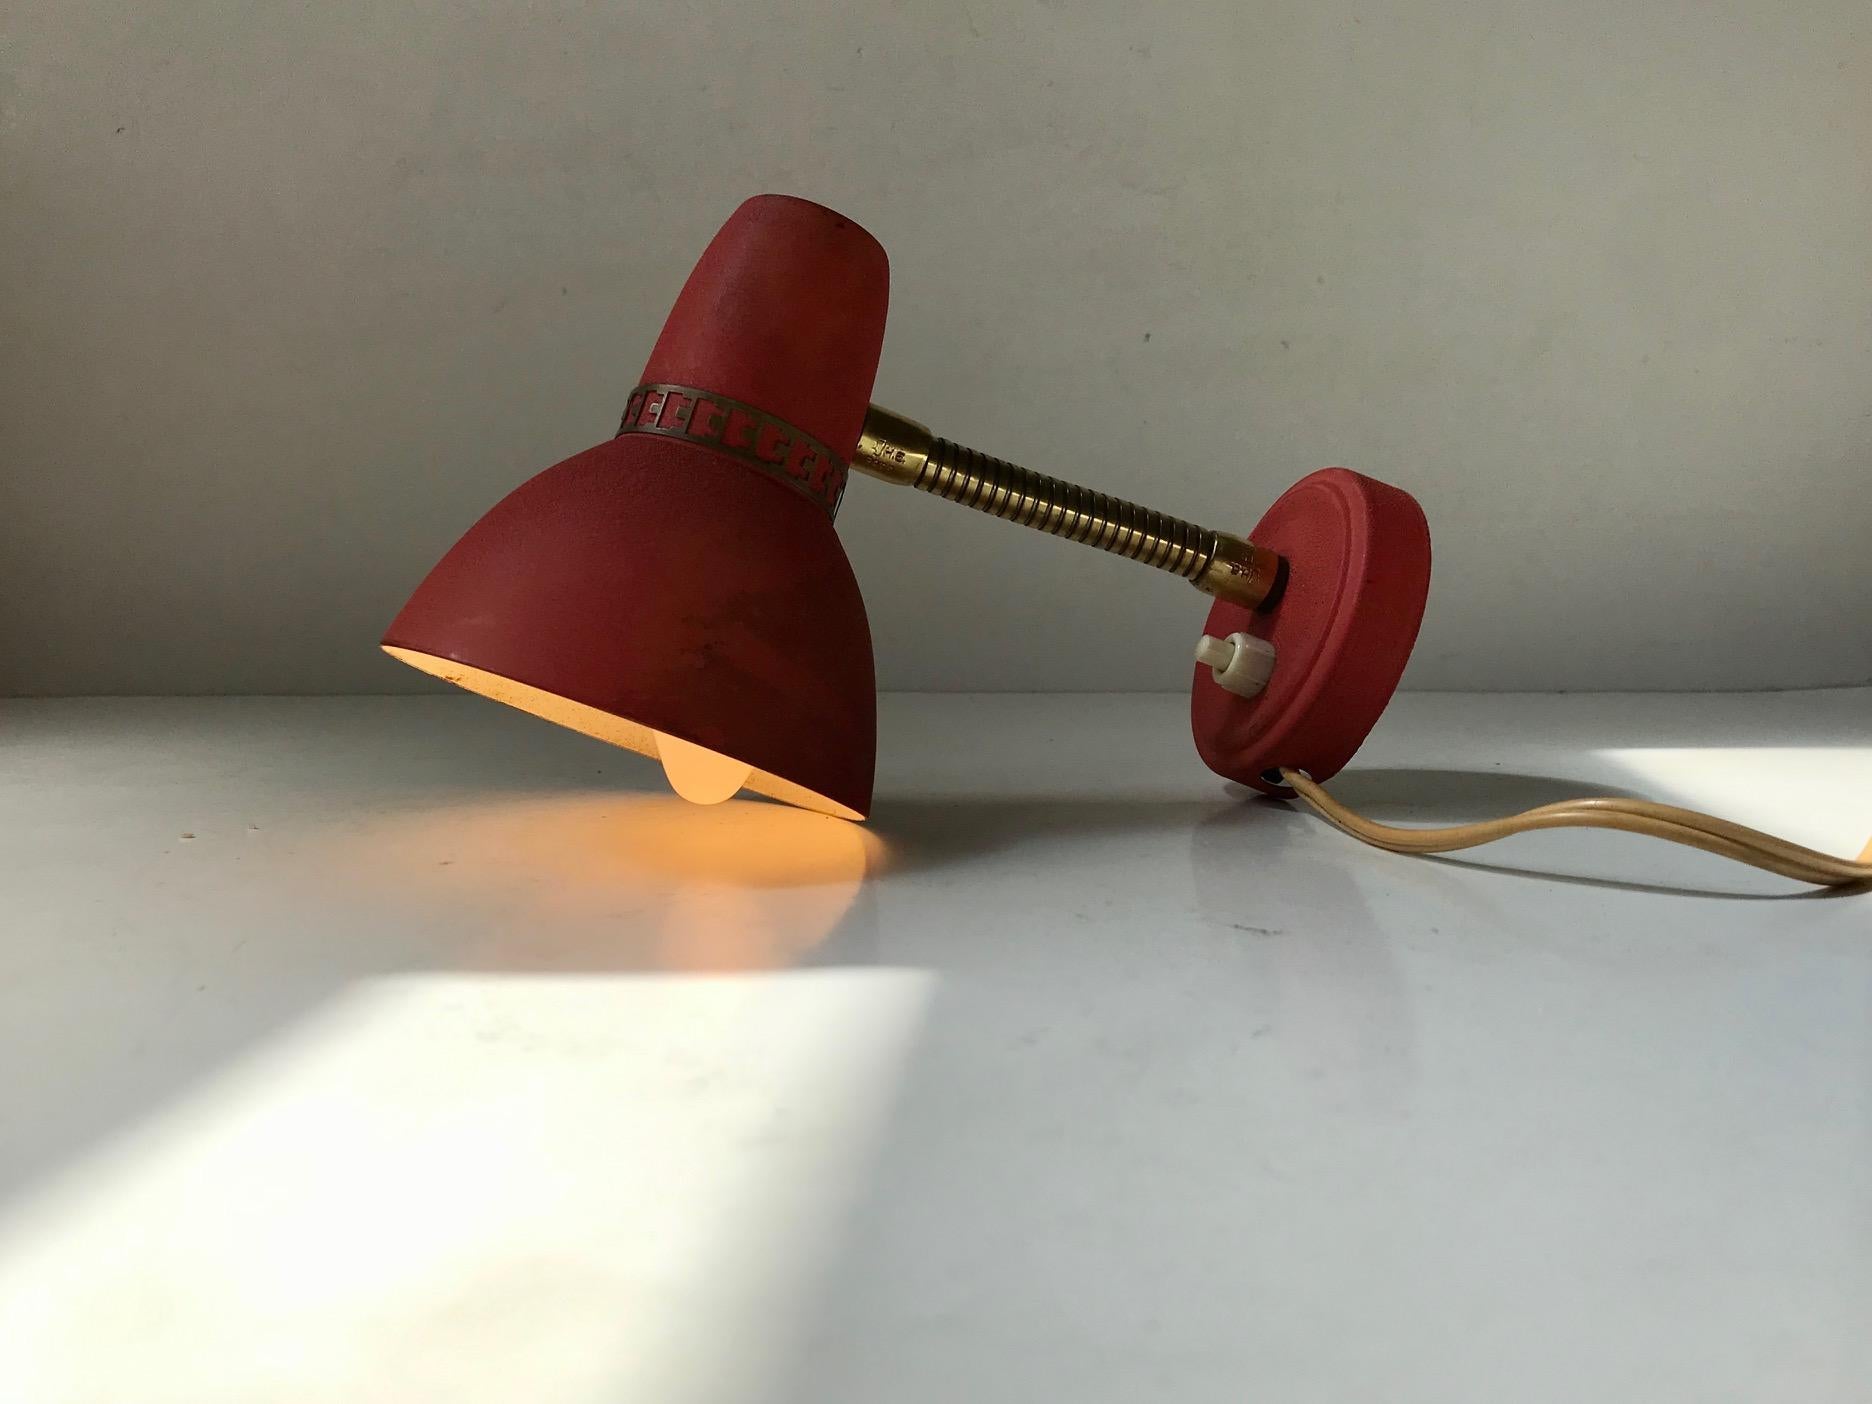 Small adjustable wall lamp made from brass and aluminium. The pastel red lacquer has been applied in such a way that its surface mimics leather. It was made in Scandinavia during the 1950s, probably by ASEA or Falkenberg.